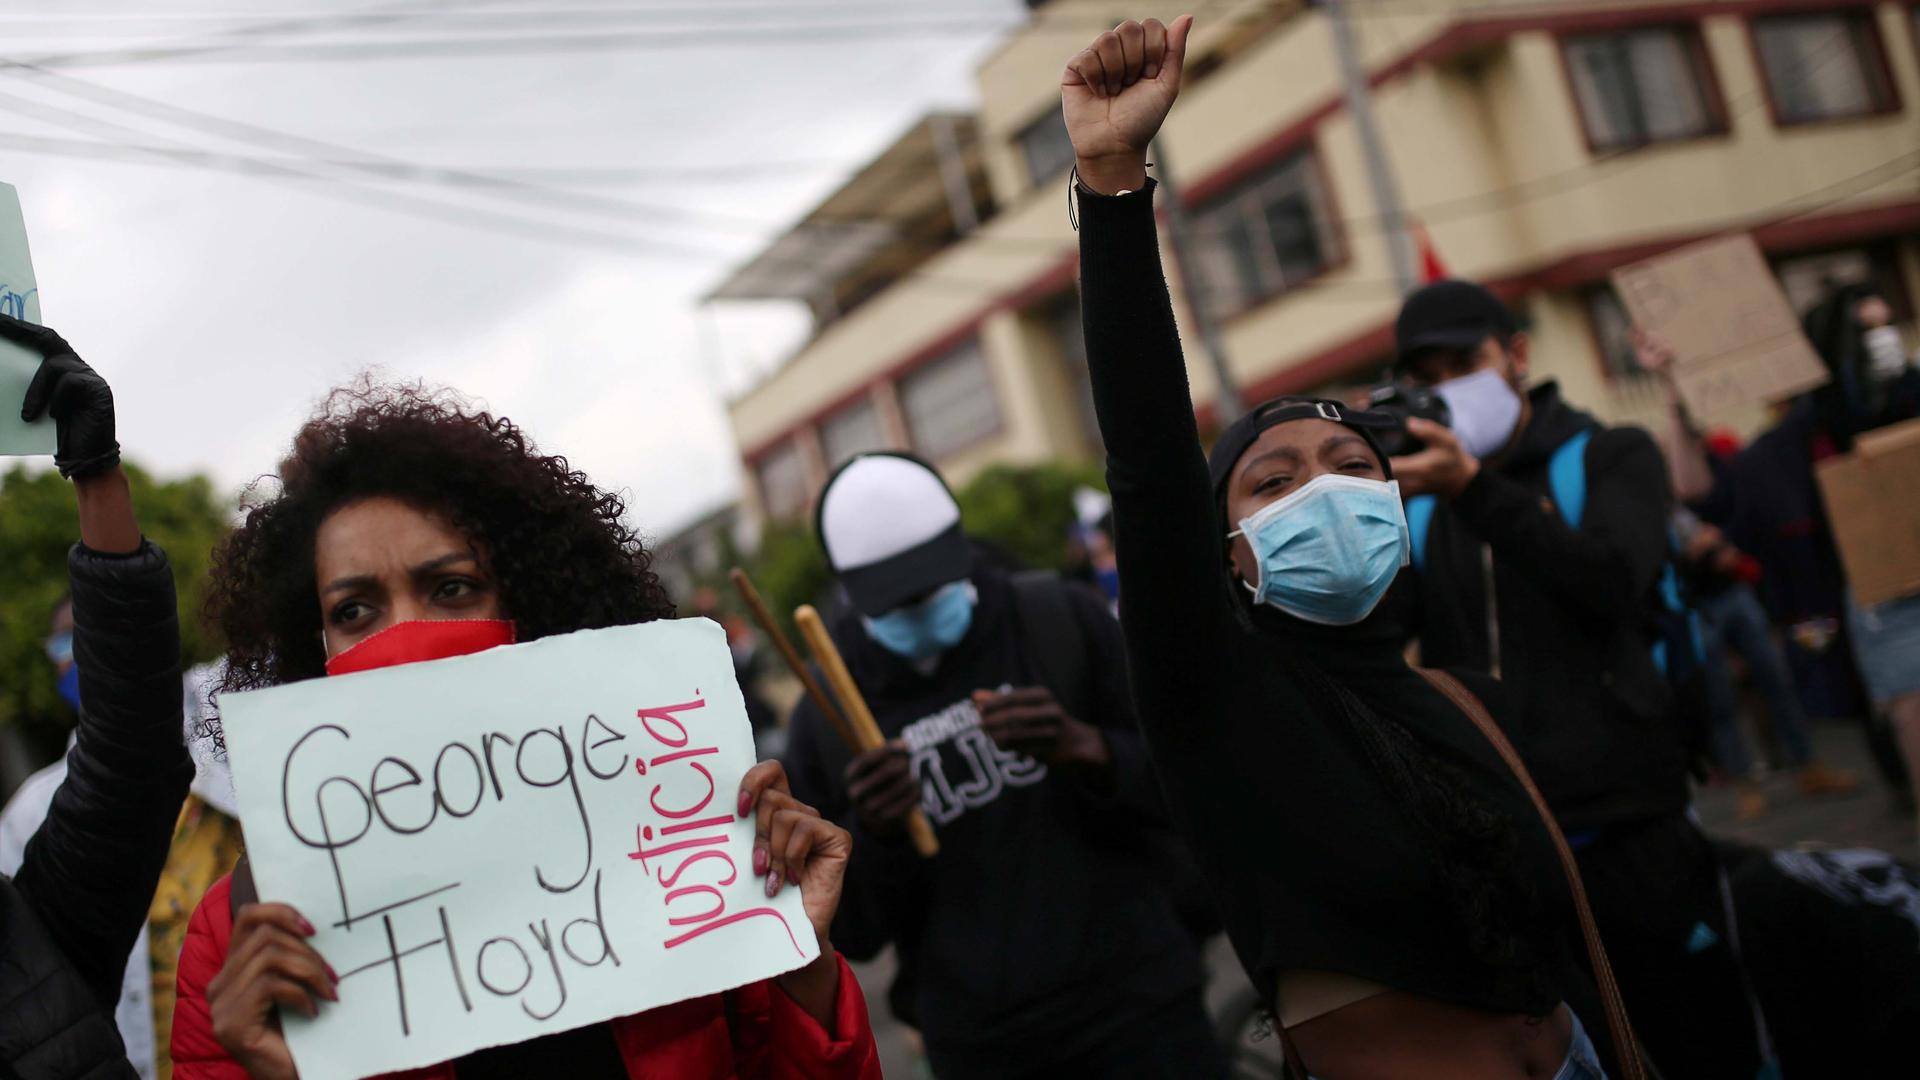 A demonstrator holds a sign that reads "George Floyd, justice" during a protest against the death in Minneapolis police custody of George Floyd and the arrival of US troops in Colombian territory, in Bogotá, Colombia, on June 3, 2020.